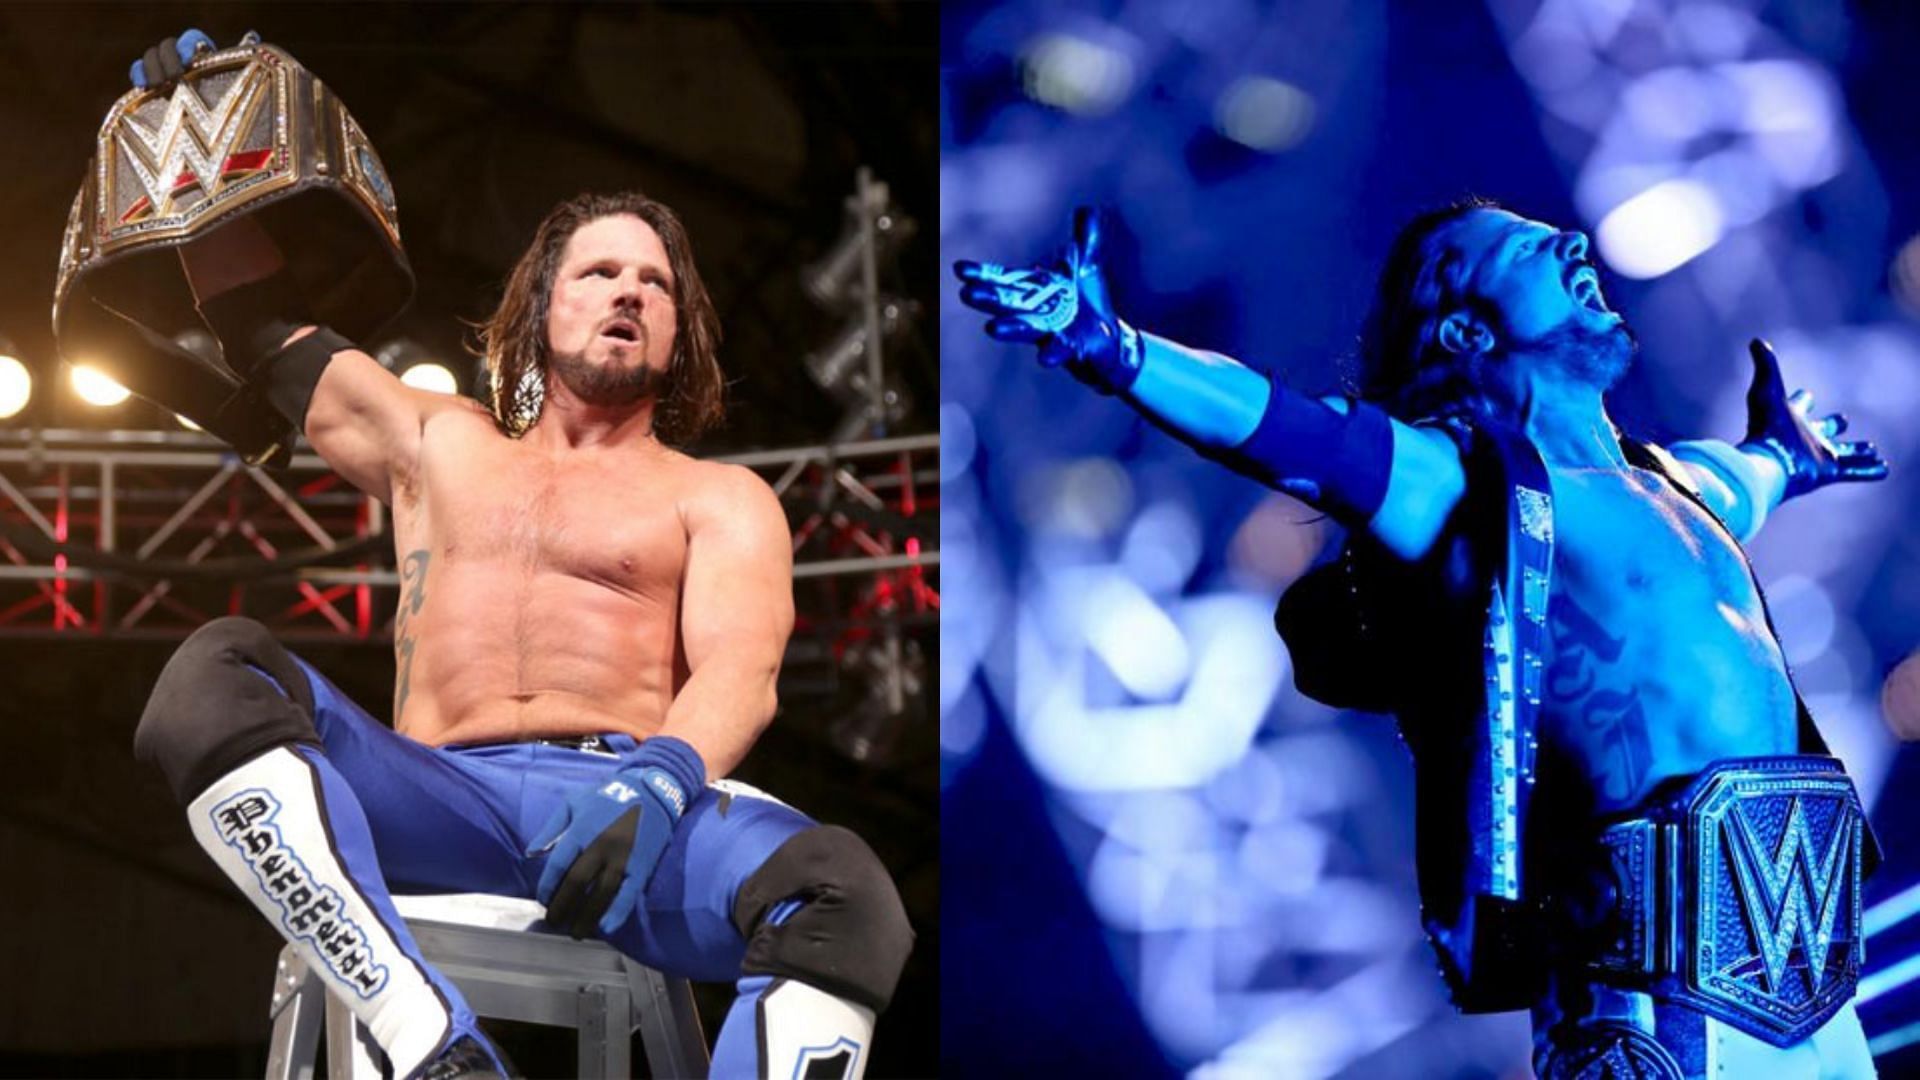 AJ Styles held the WWE Championship twice since joining the company in 2016